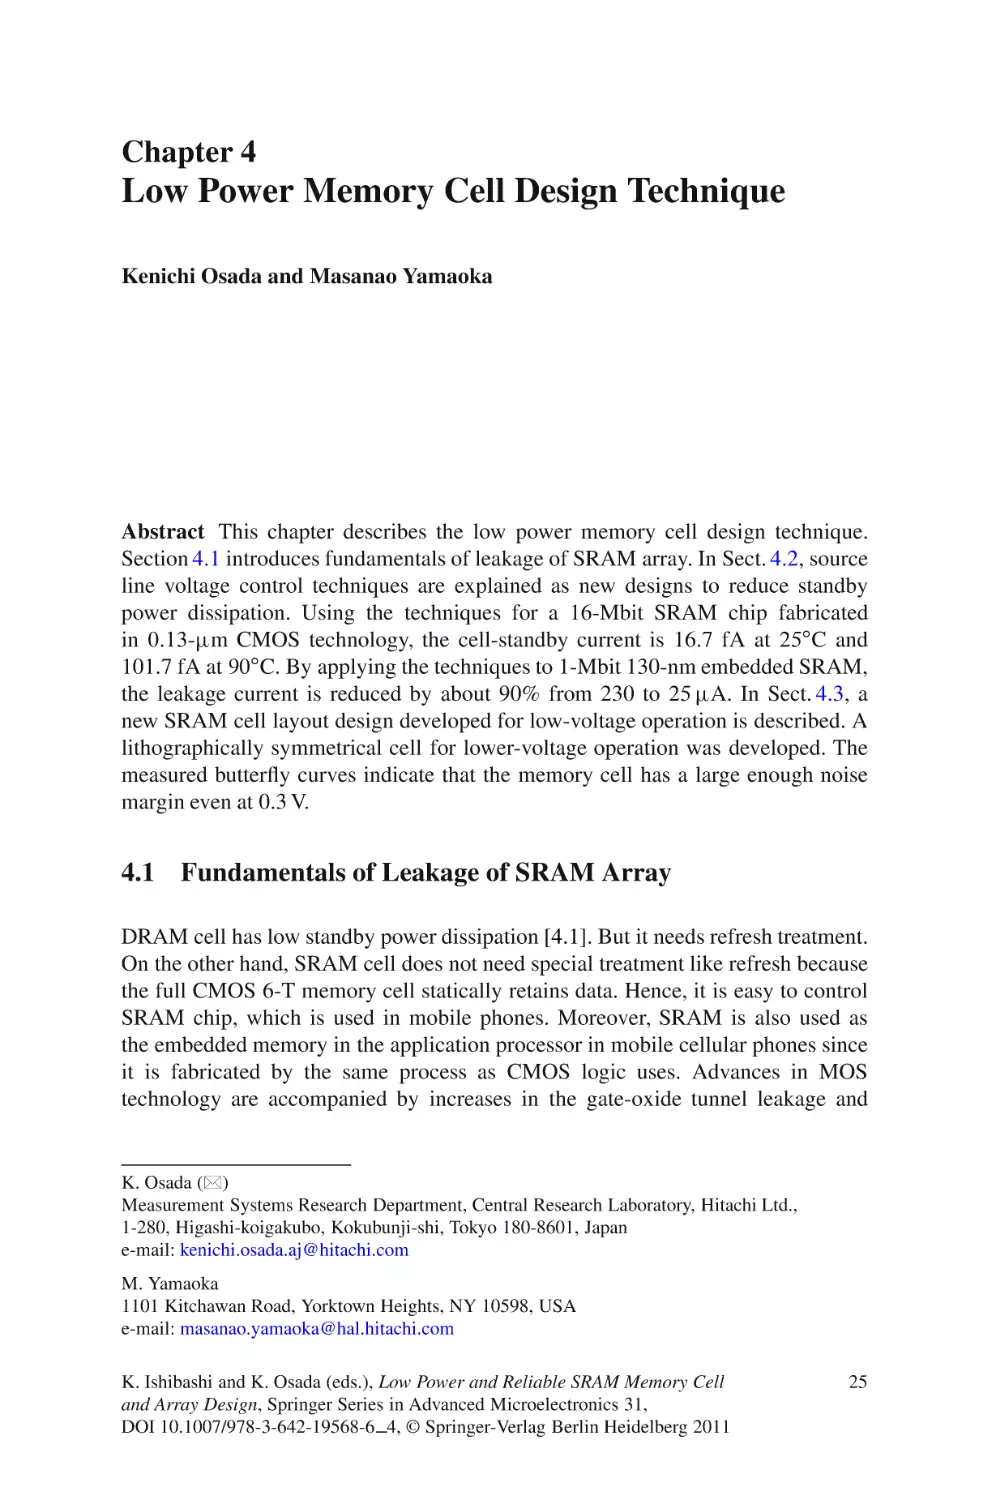 fulltext(3)
Chapter 4
4.1 Fundamentals of Leakage of SRAM Array